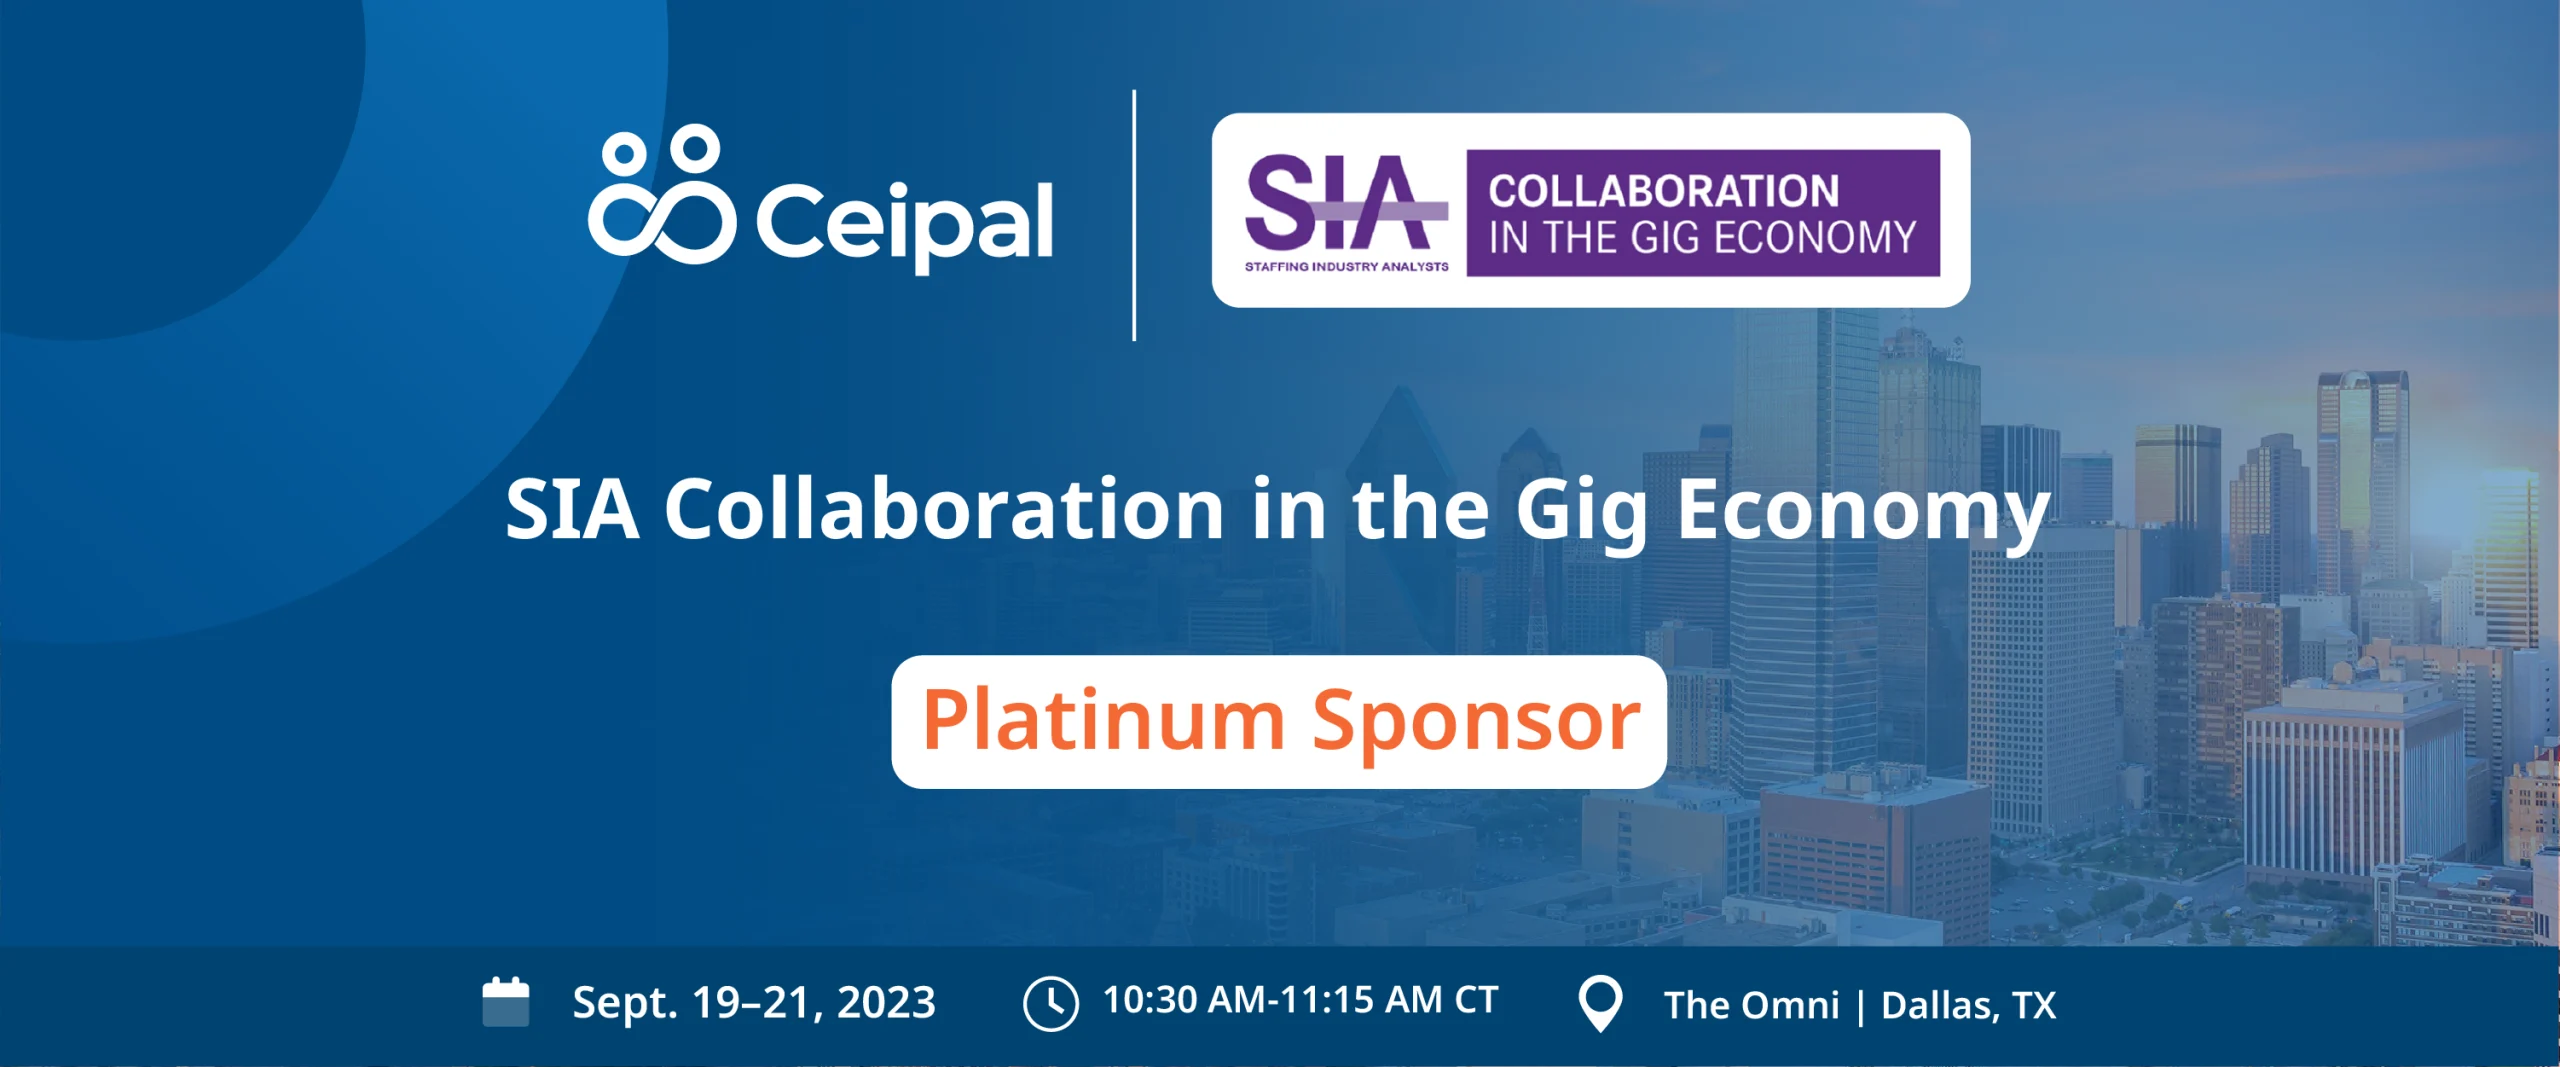 SIA Collaboration in the Gig Economy 2023